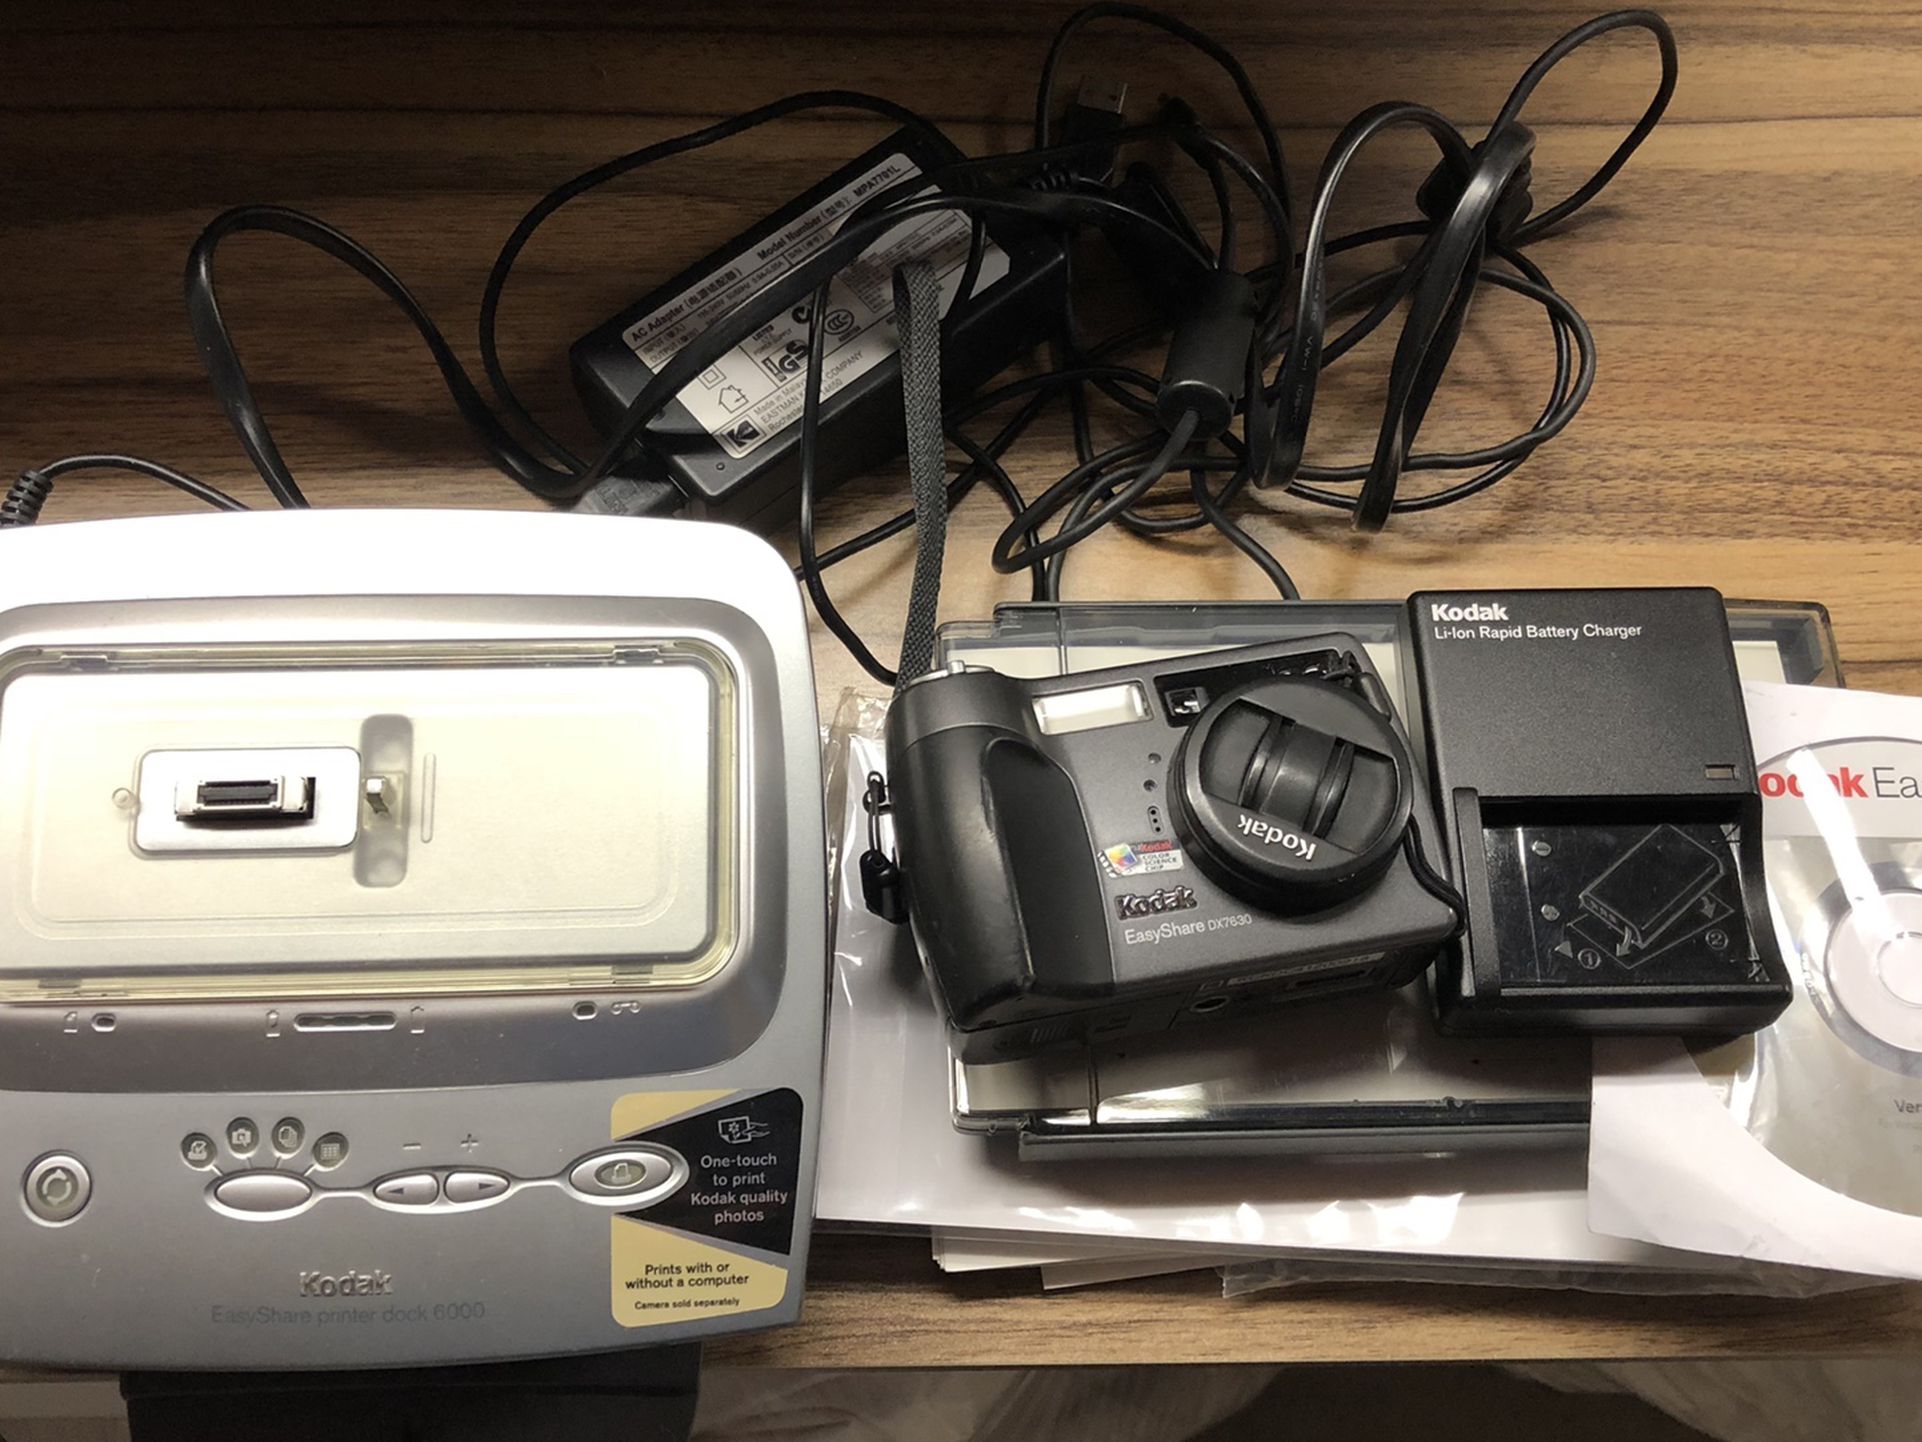 Kodak Digital Camera and Photo Printer (includes paper, cables, install CD, and charger)